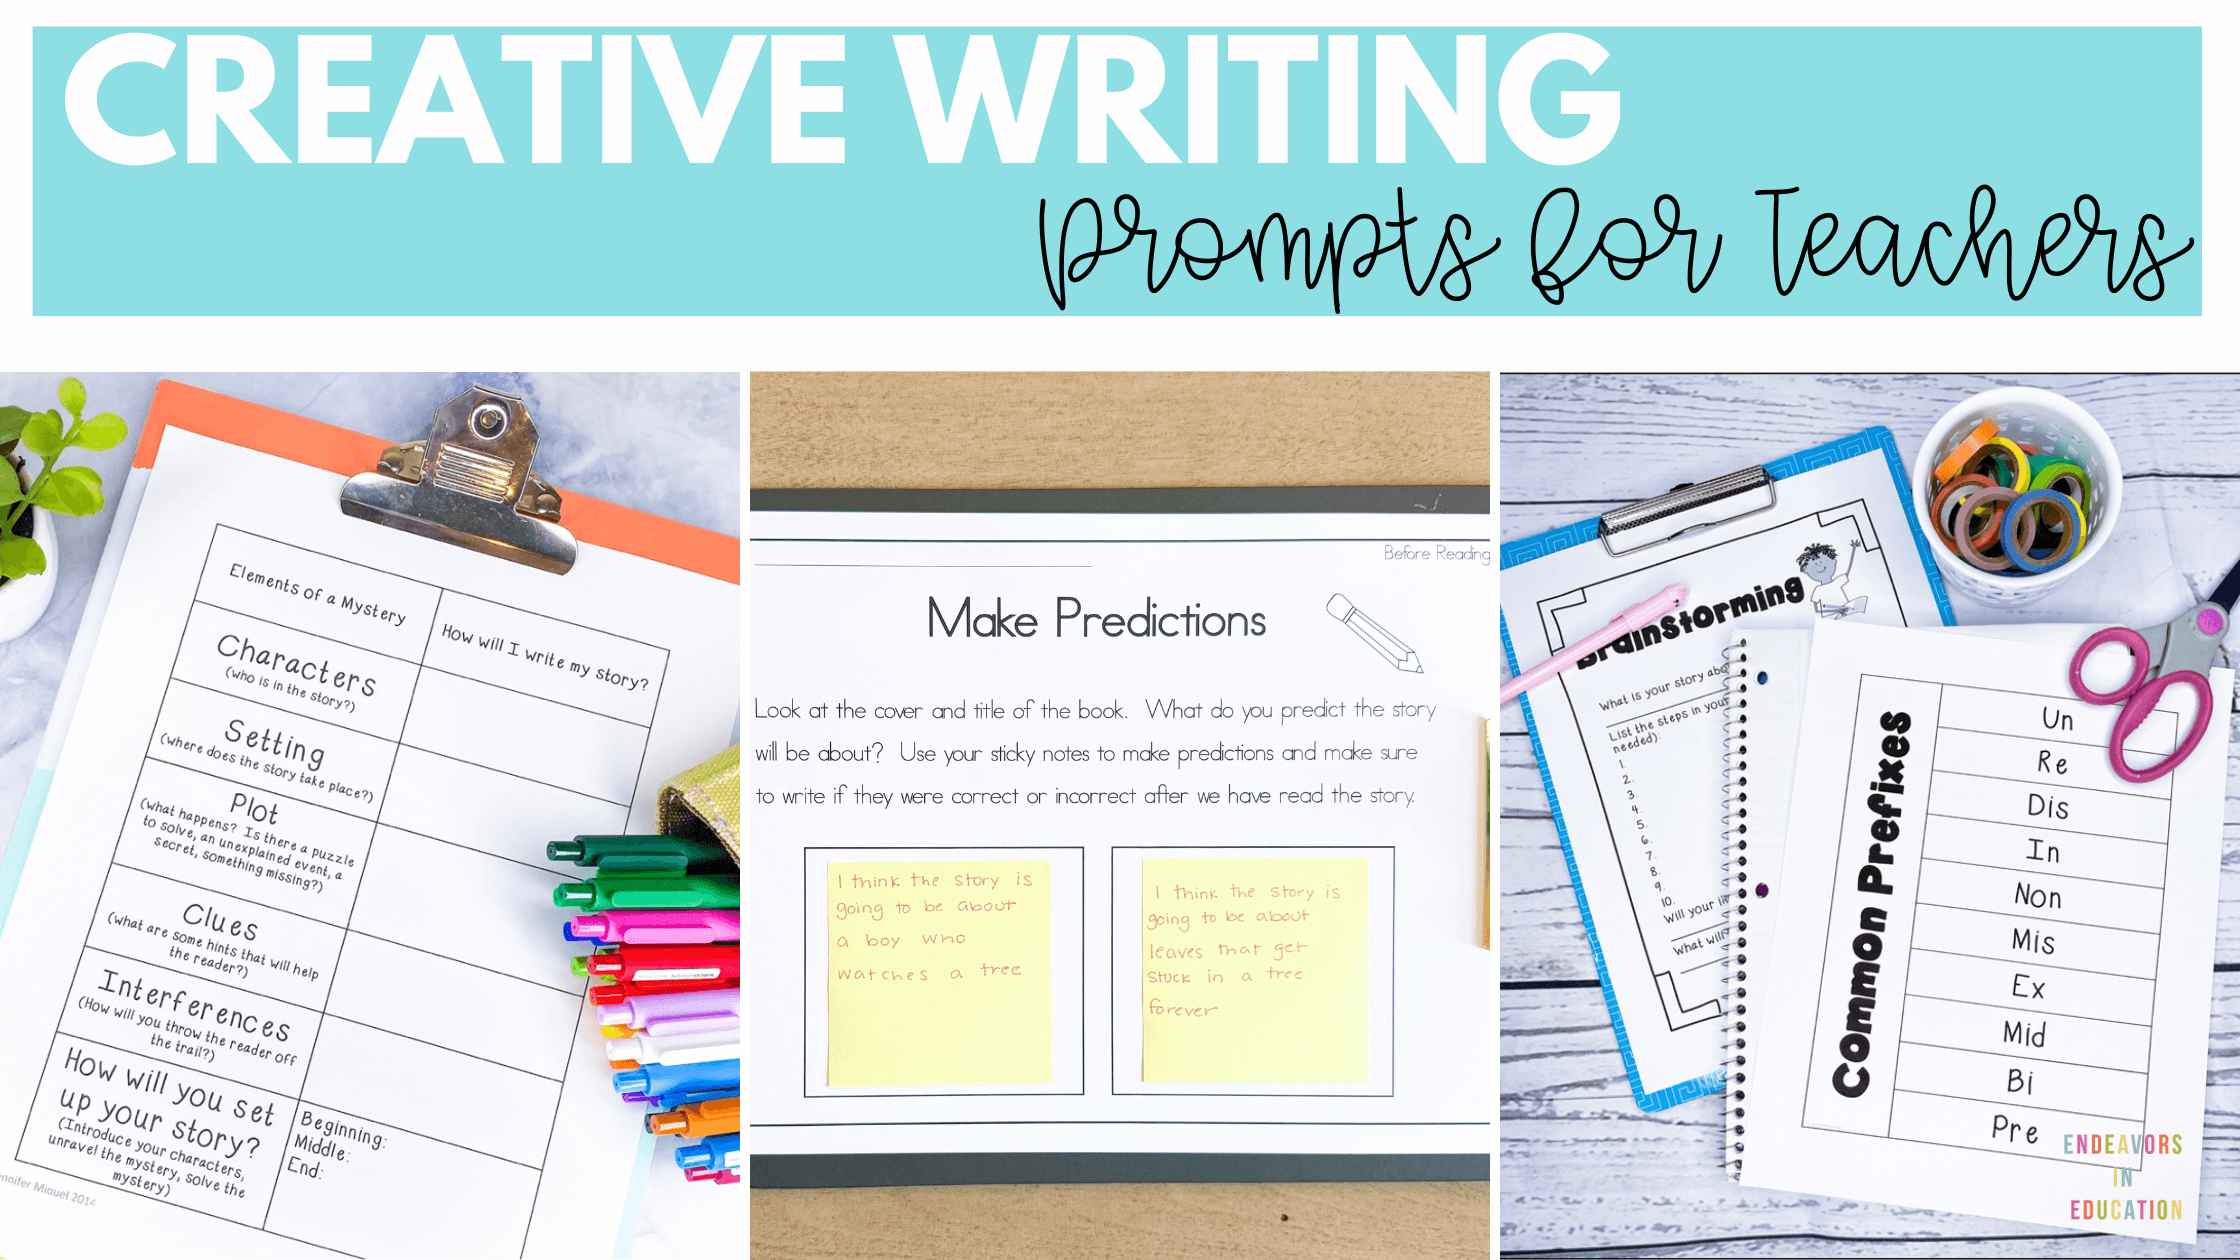 Text says Creative Writing prompts for teachers and there are 3 images of writing assignments below